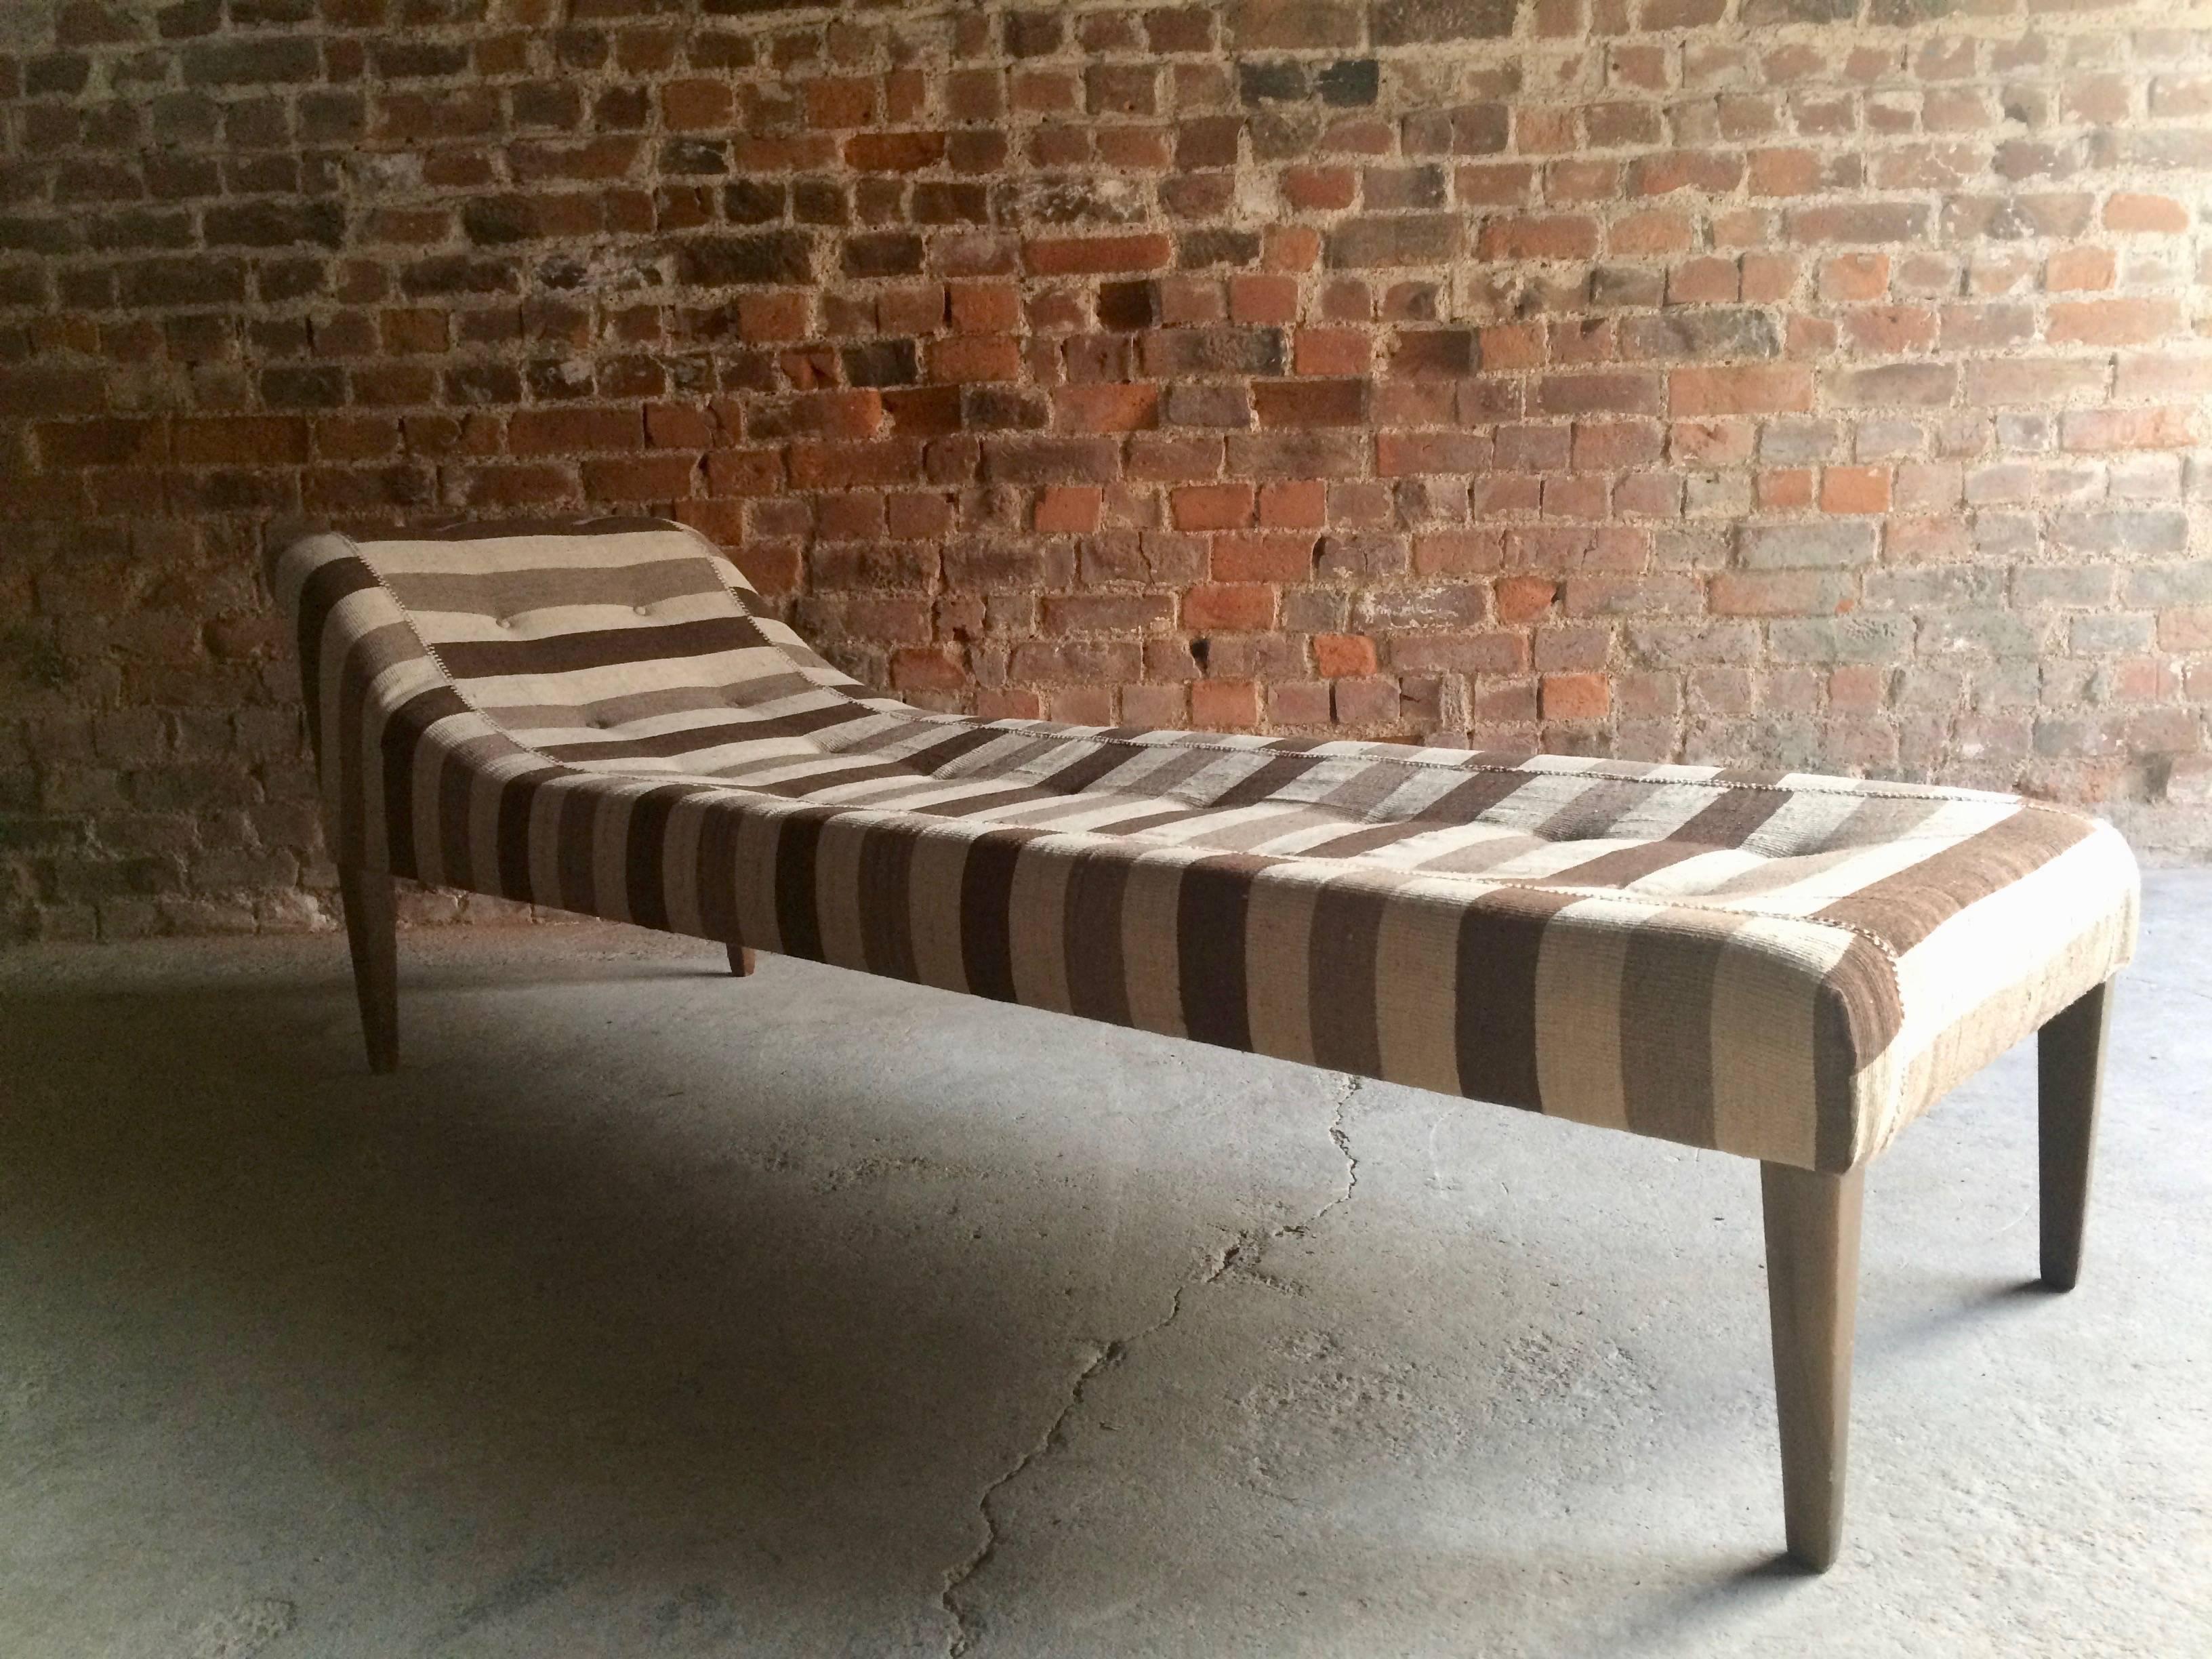 A stunning Fendi Casa chaise longue or daybed, upholstered in Persian natural dyed Jijin hand woven fabric, on oak legs, offered in excellent condition.